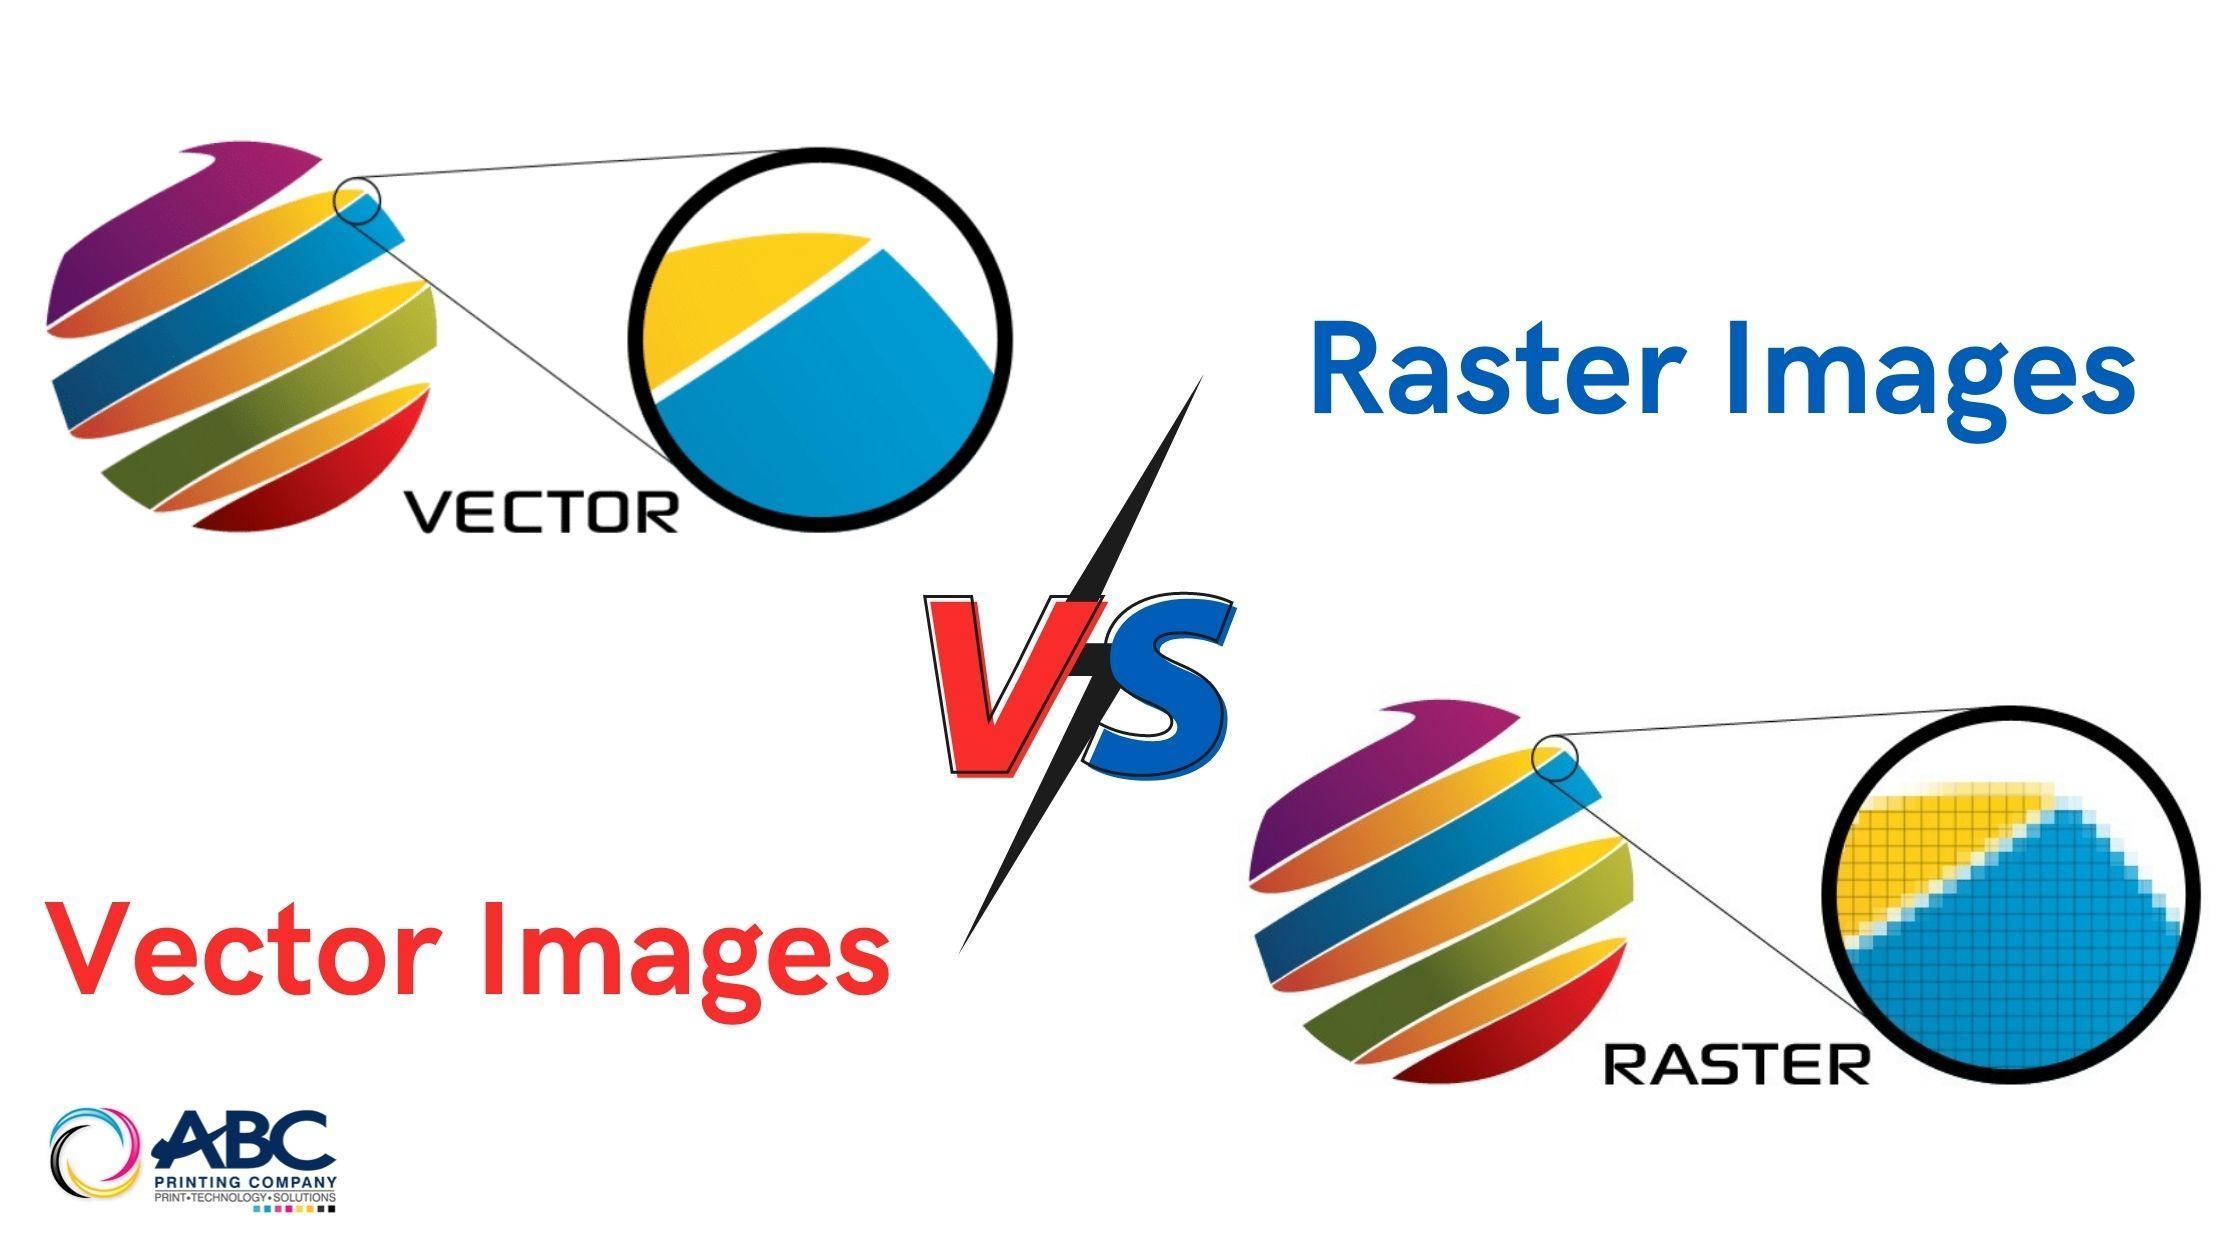 What’s the Difference Between Raster and Vector